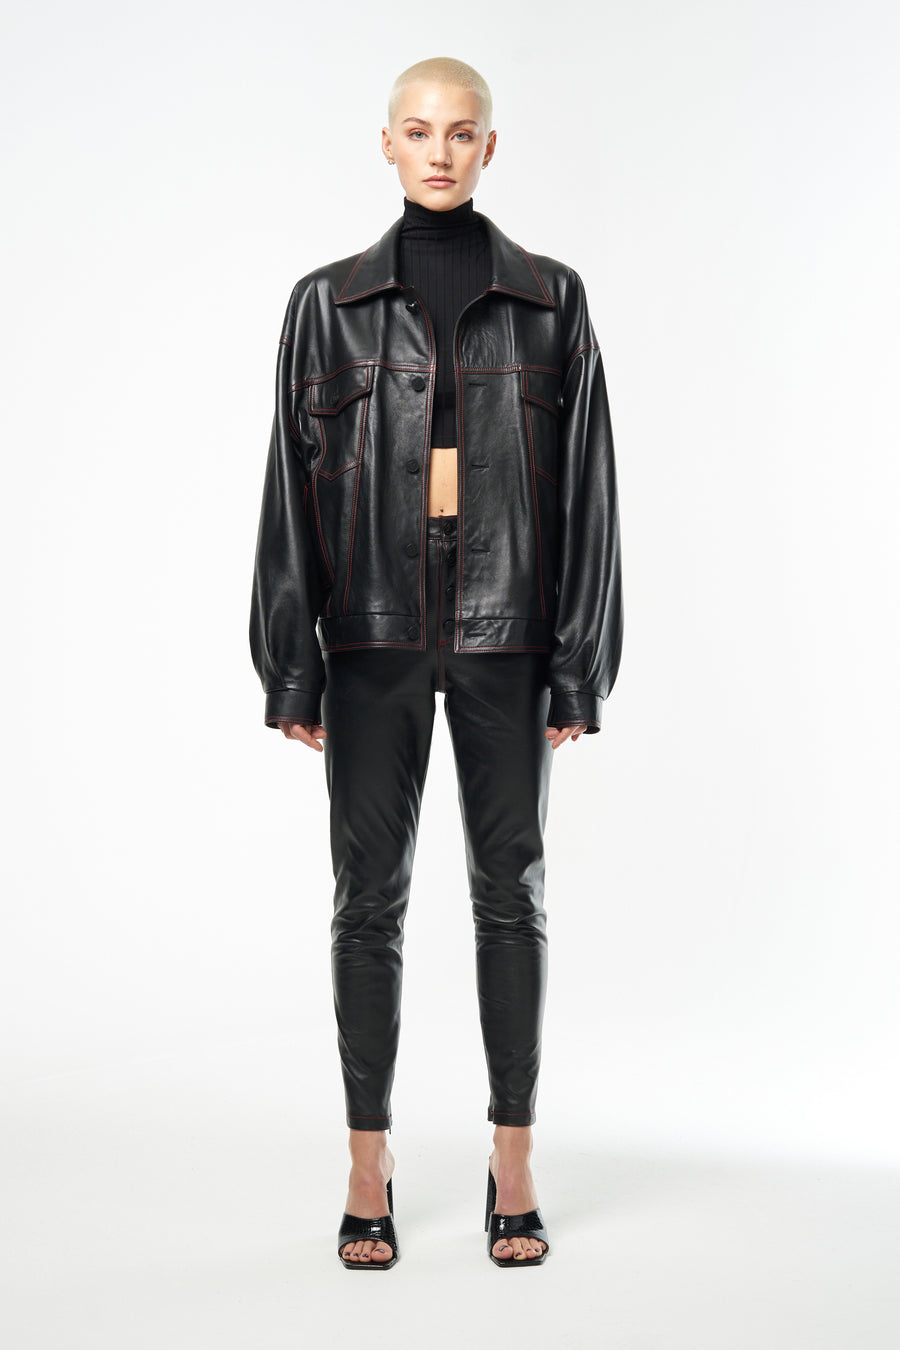 Designer Oversized Leather Jacket | Outerwear Made in London